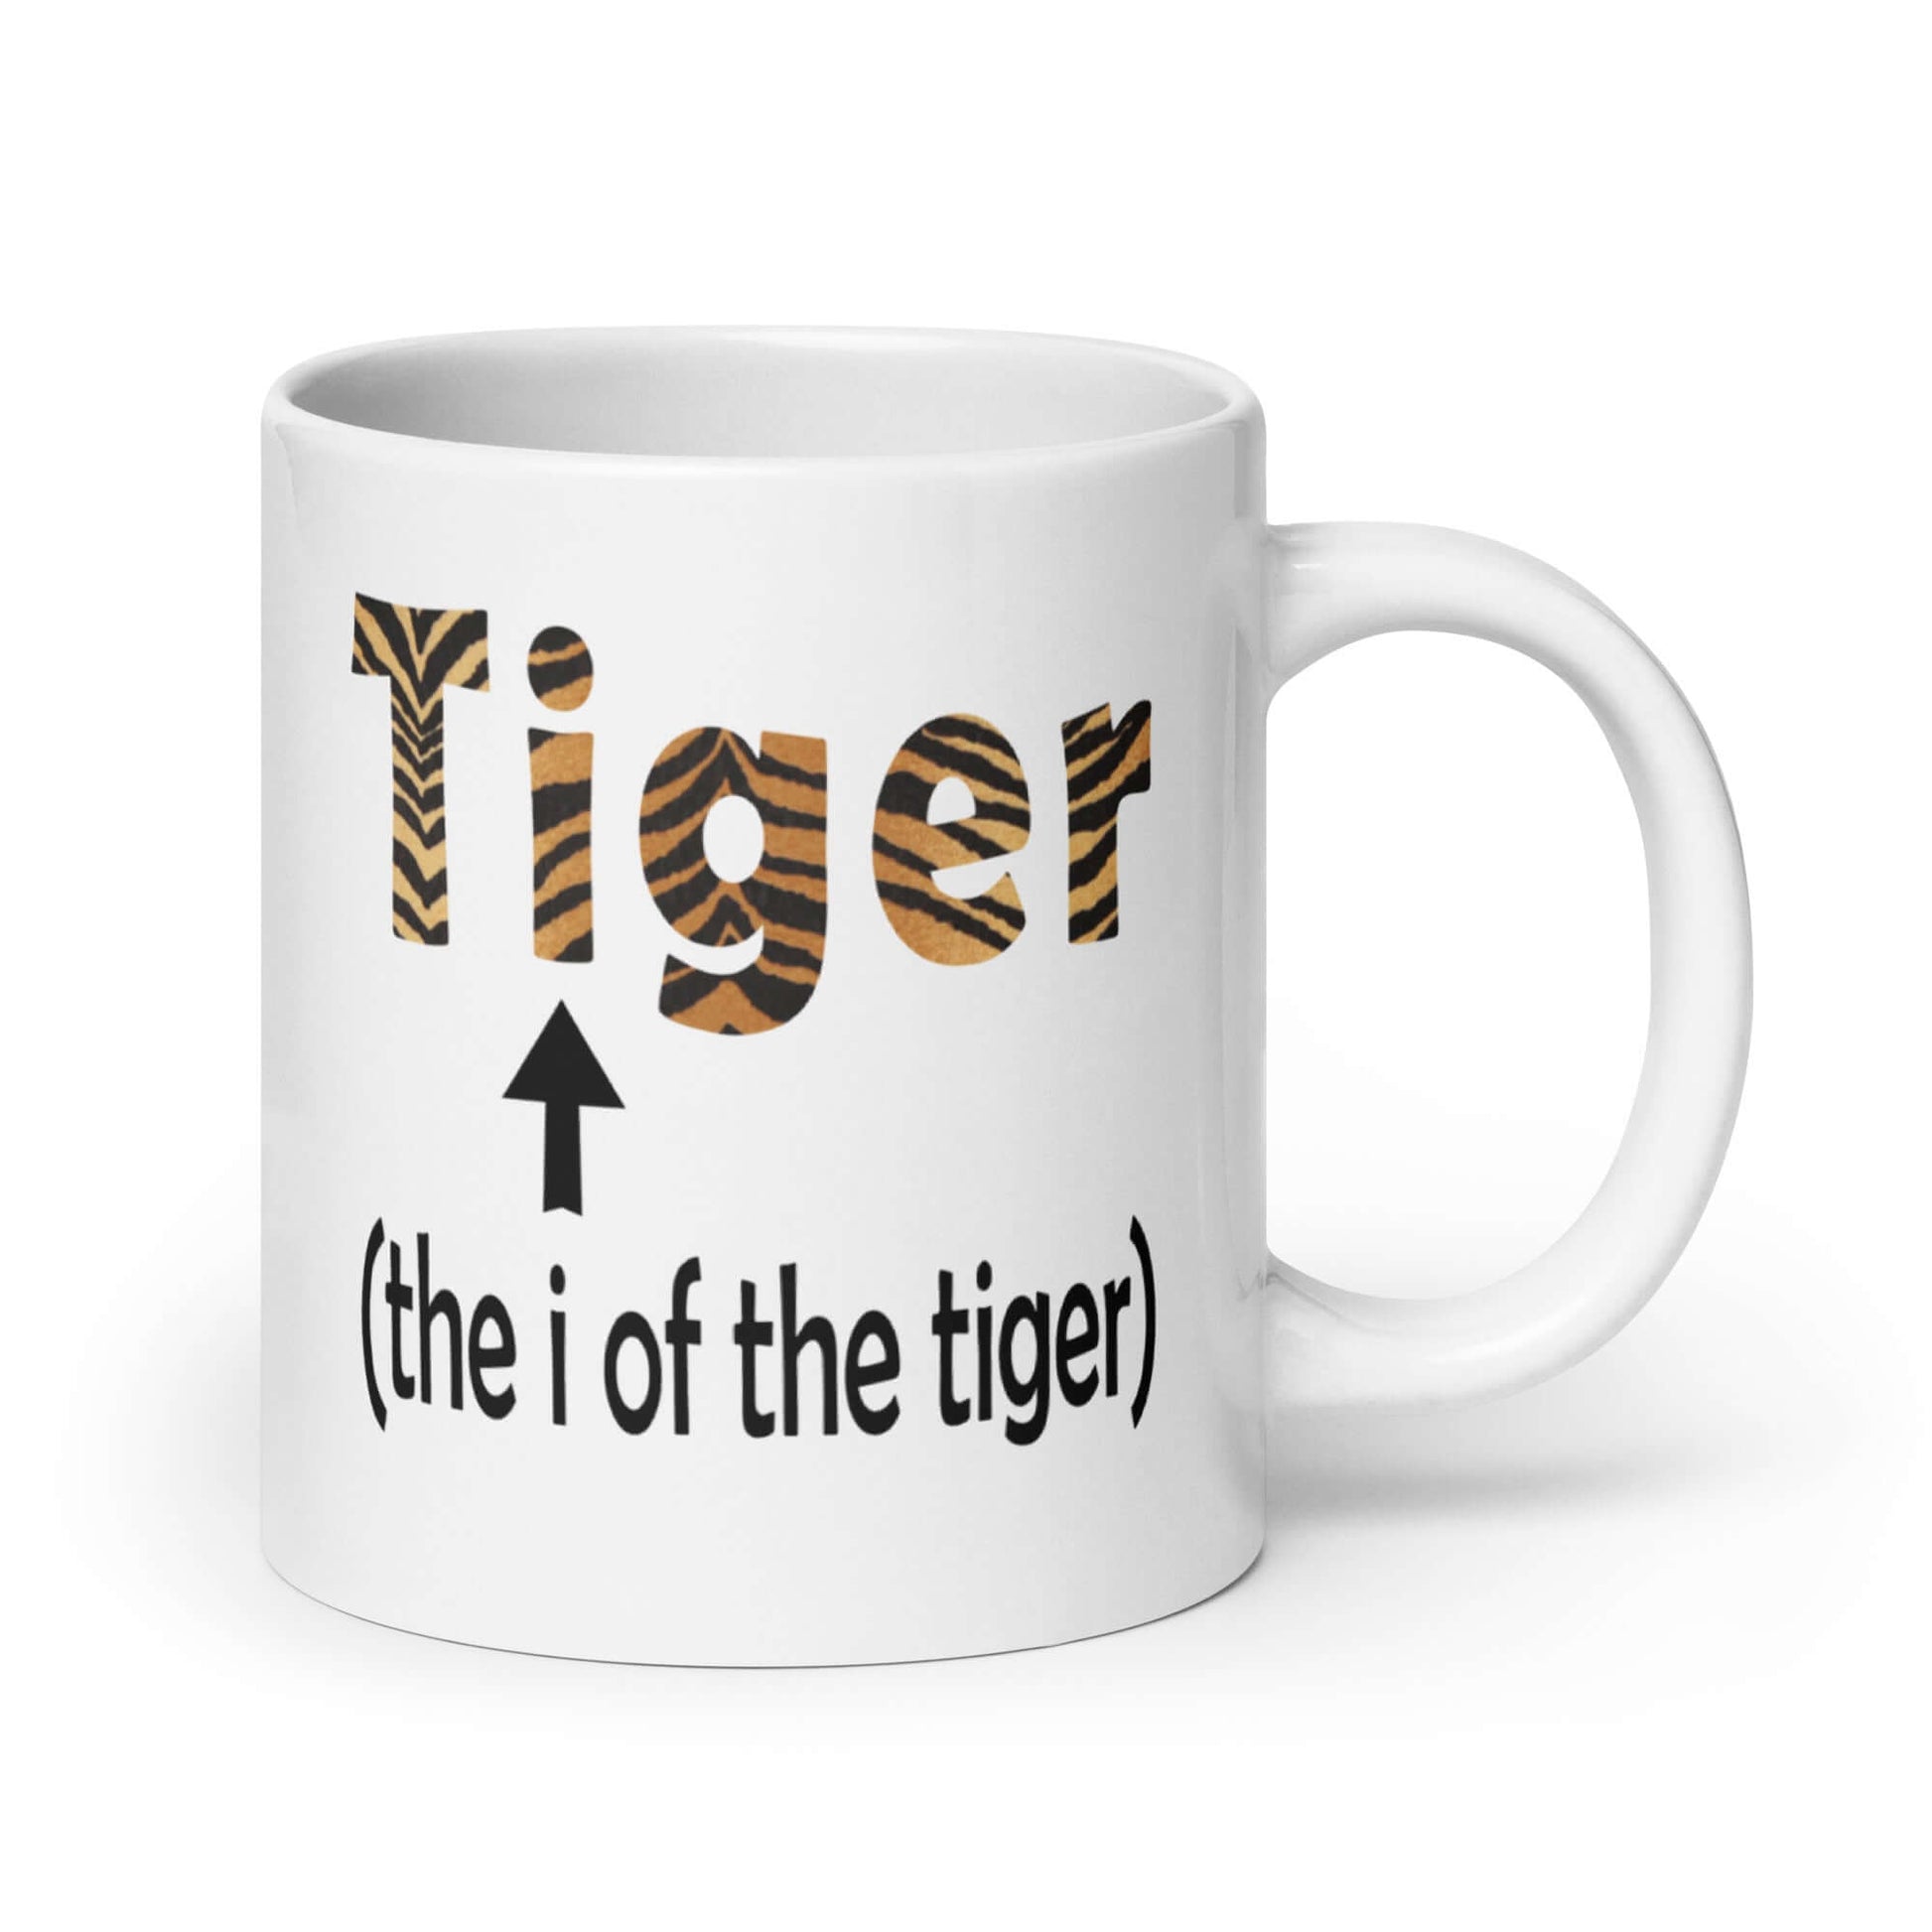 White ceramic coffee mug with the word Tiger printed in a tiger stripe font. In smaller letters beneath tiger it says the I of the tiger with an arrow pointing to the letting I in the words tiger. The graphics are printed on both sides of the mug.